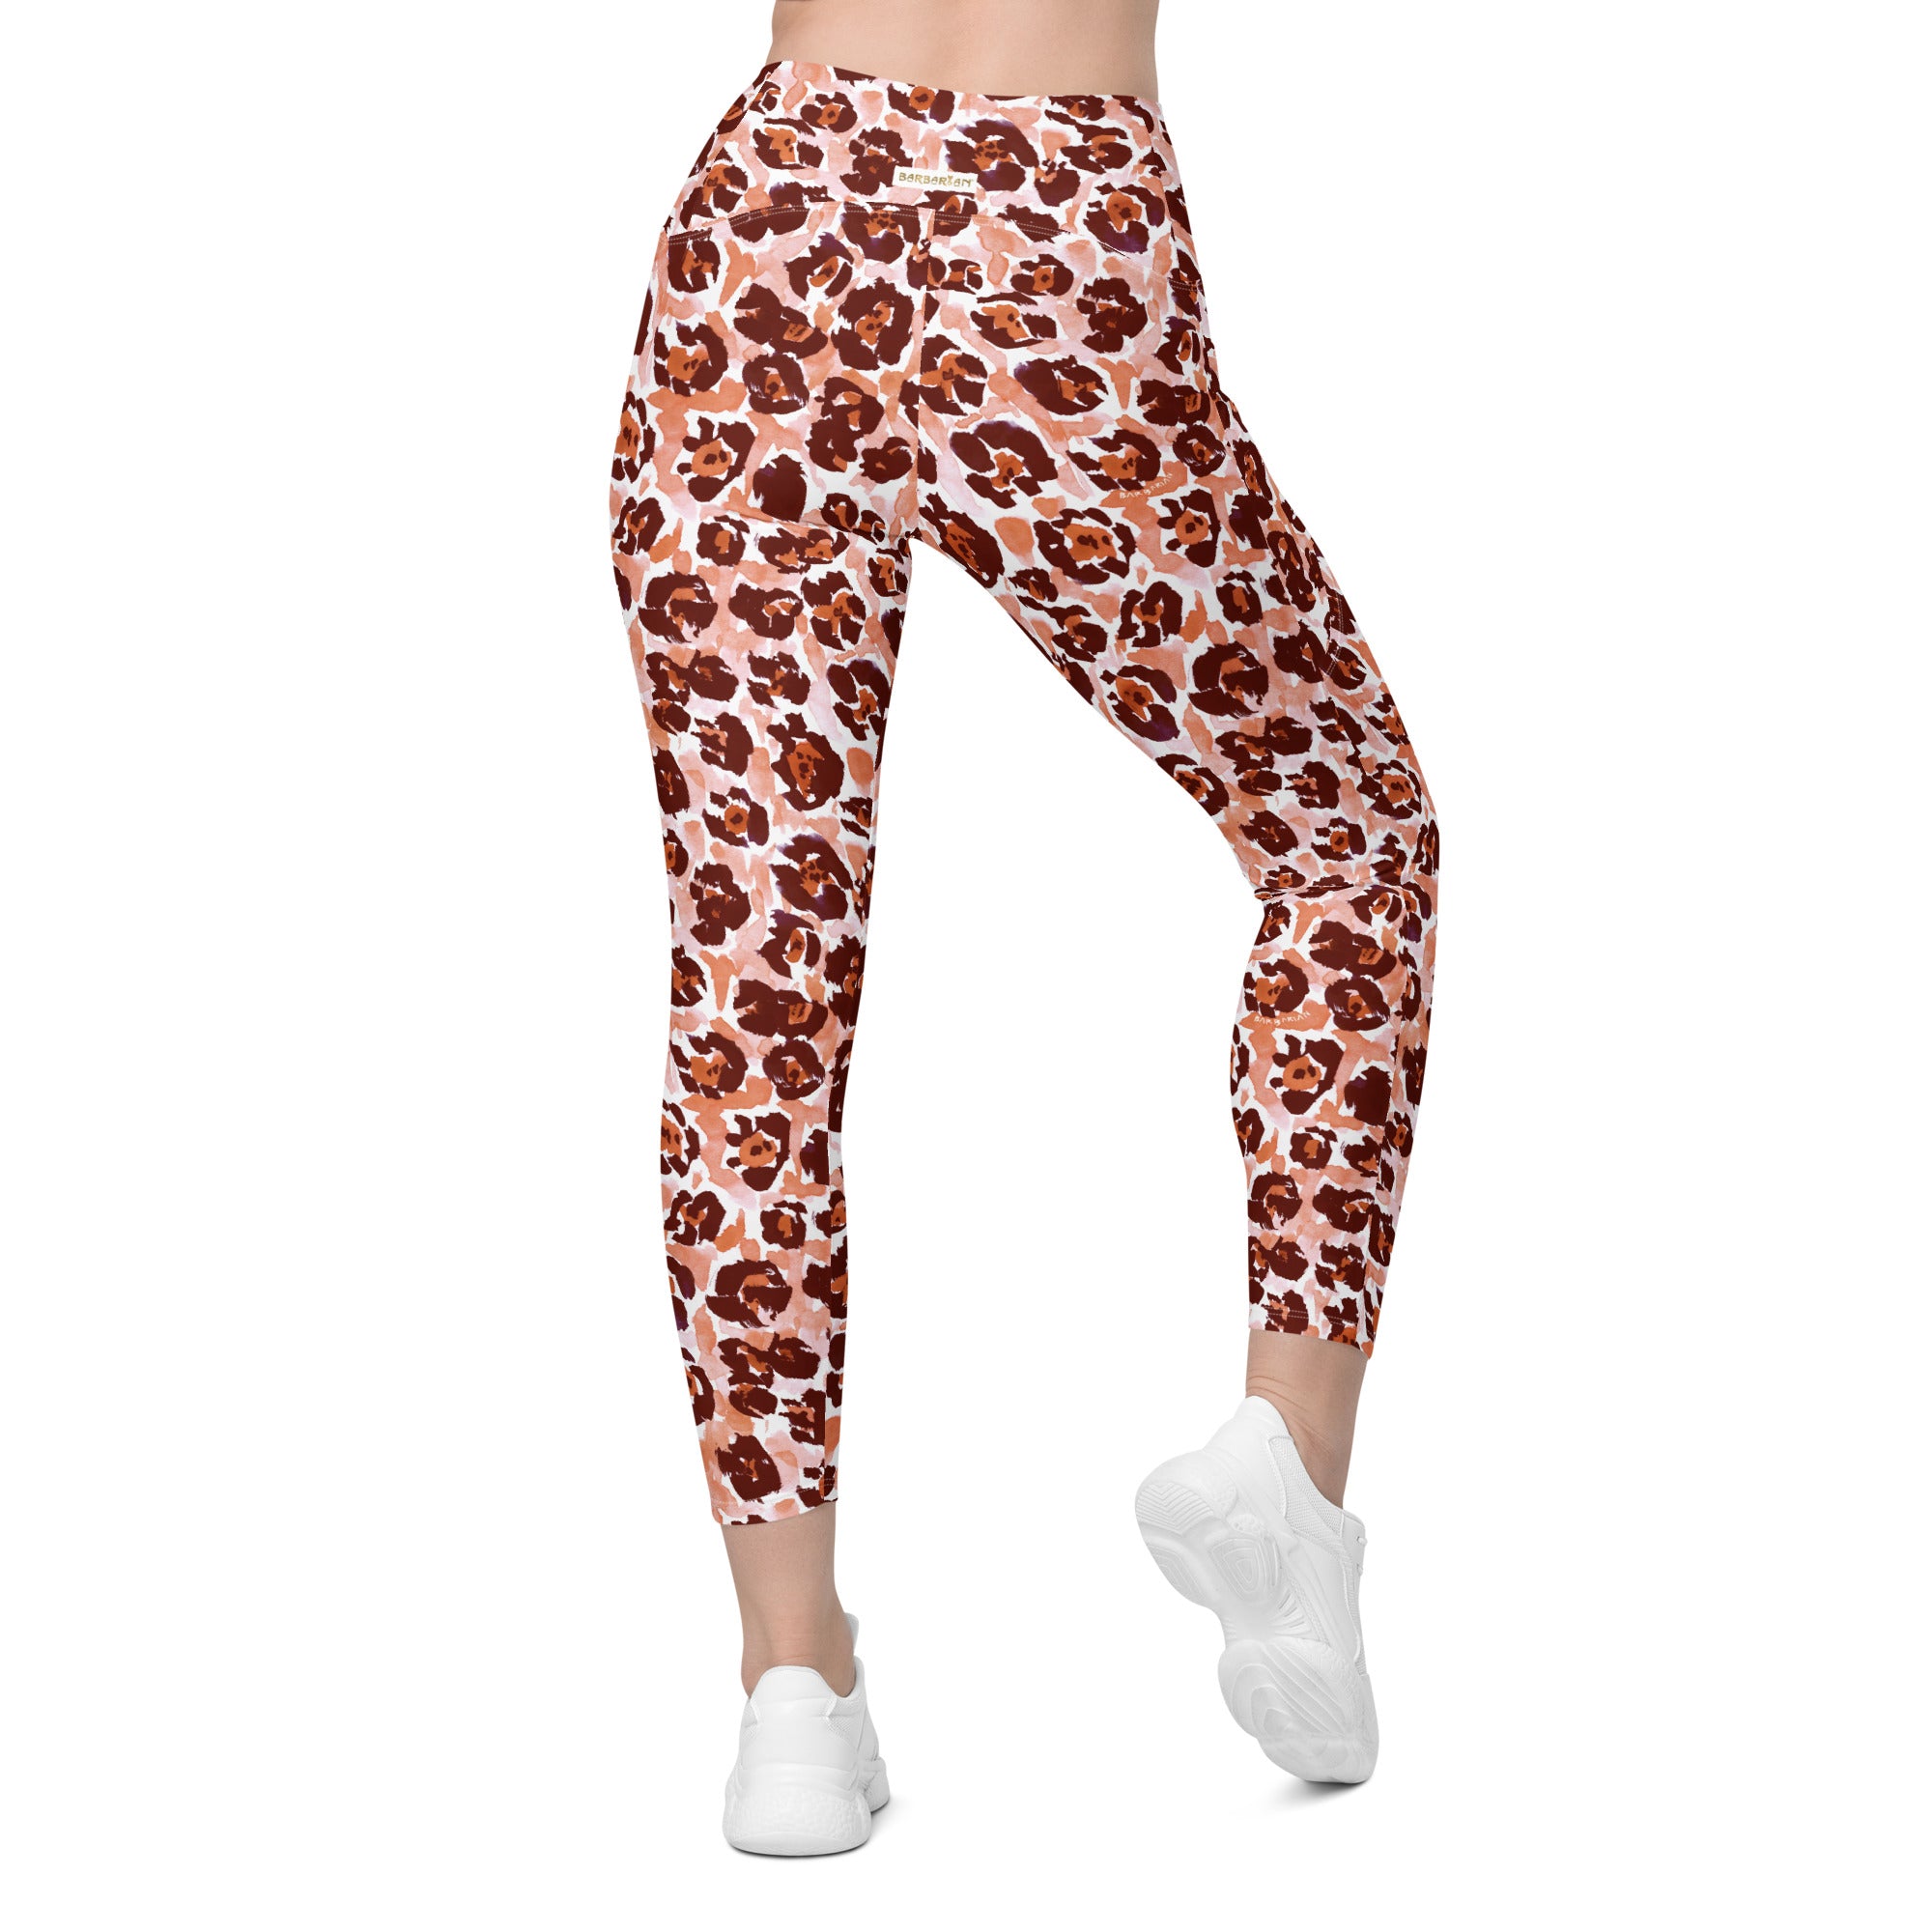 POWER PU$$ Crossover Leggings with Pockets